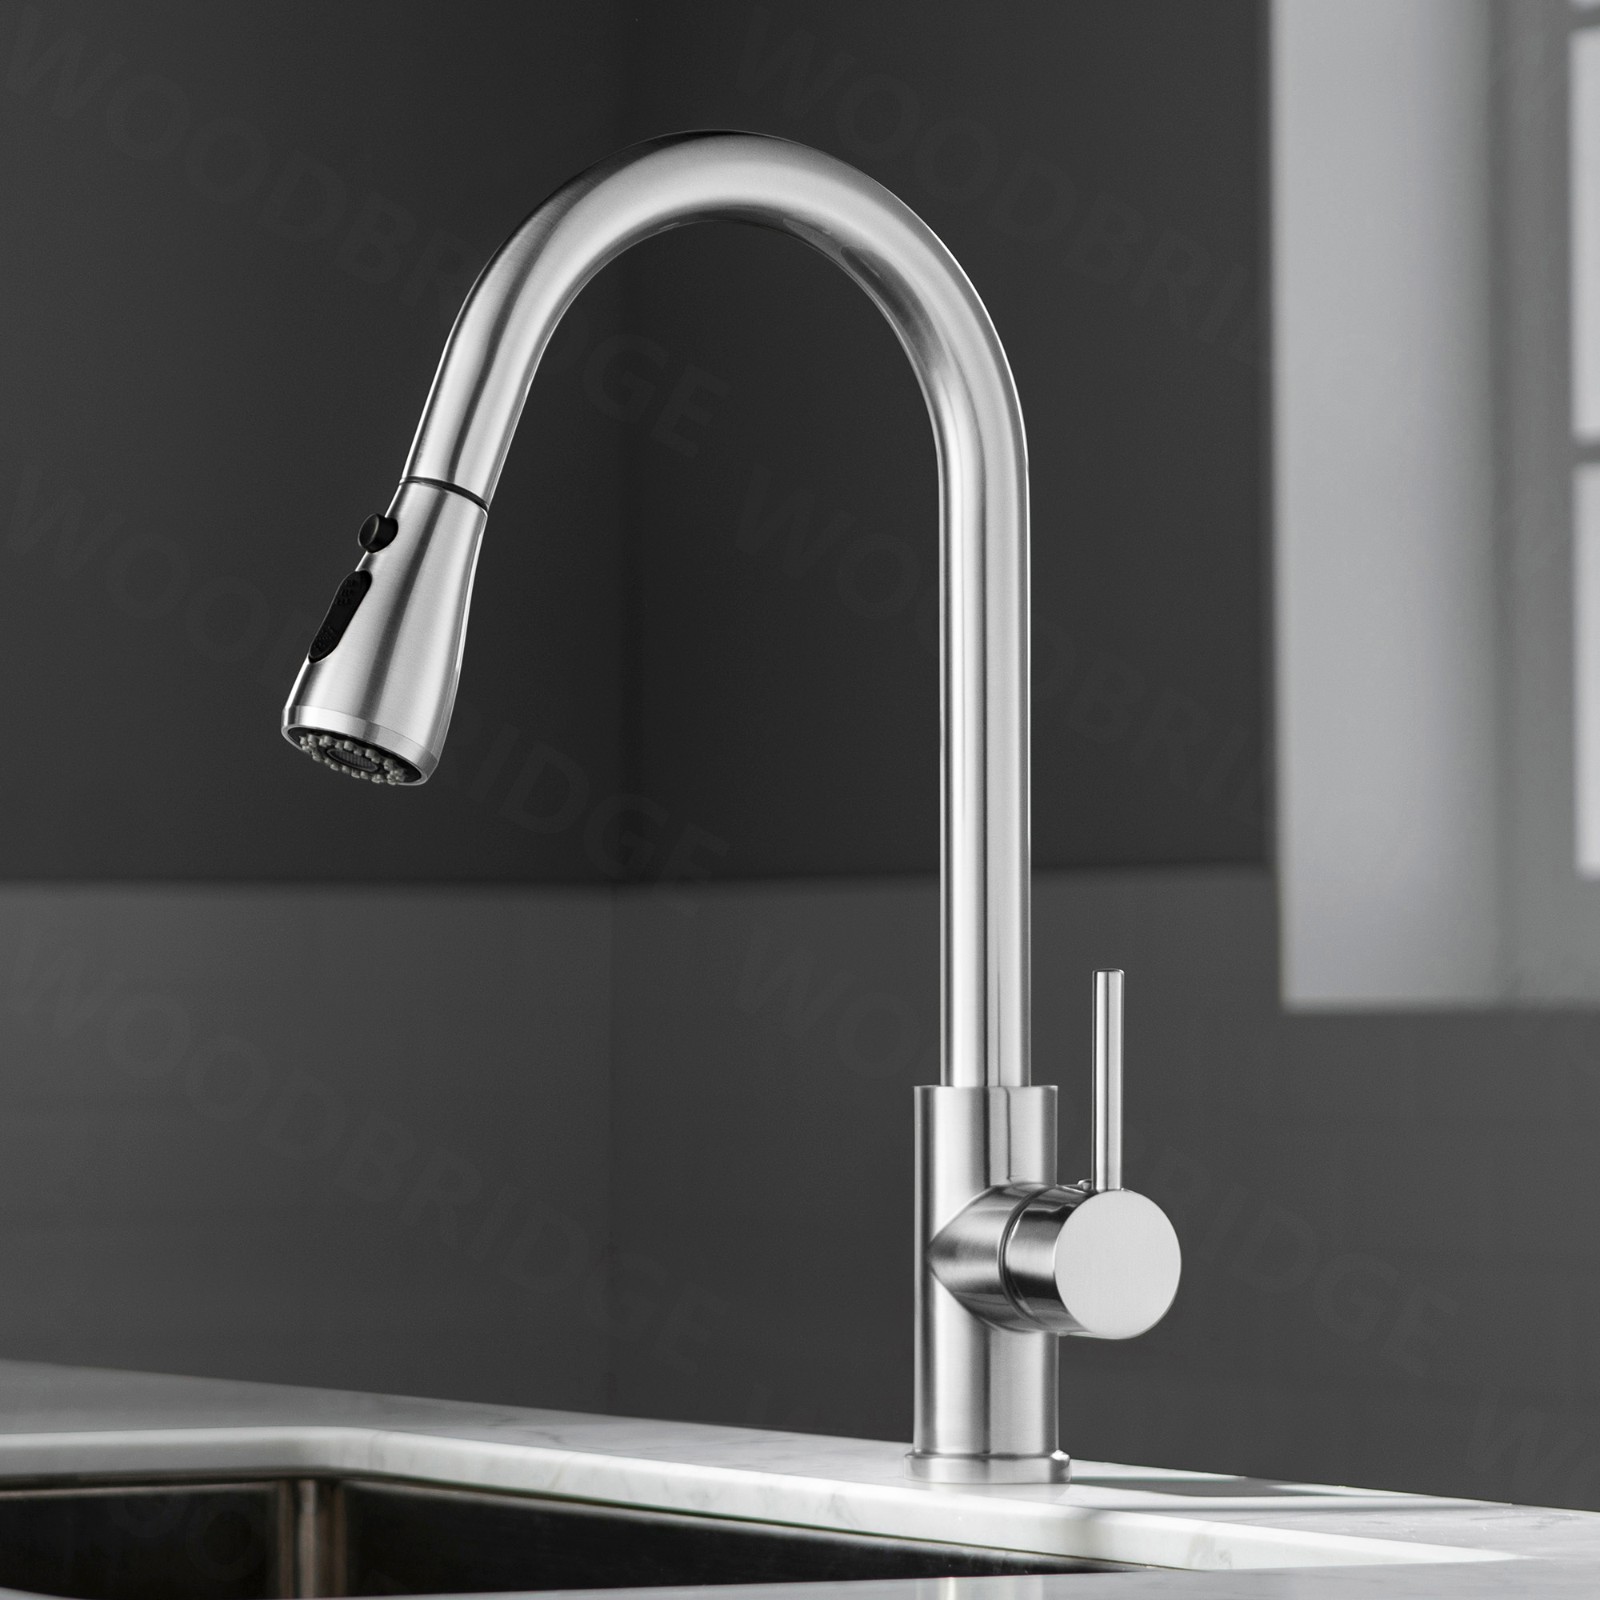  WOODBRIDGE WK090802CH Single Handle Pull Down Kitchen Faucet in Polished Chrome Finish._5026